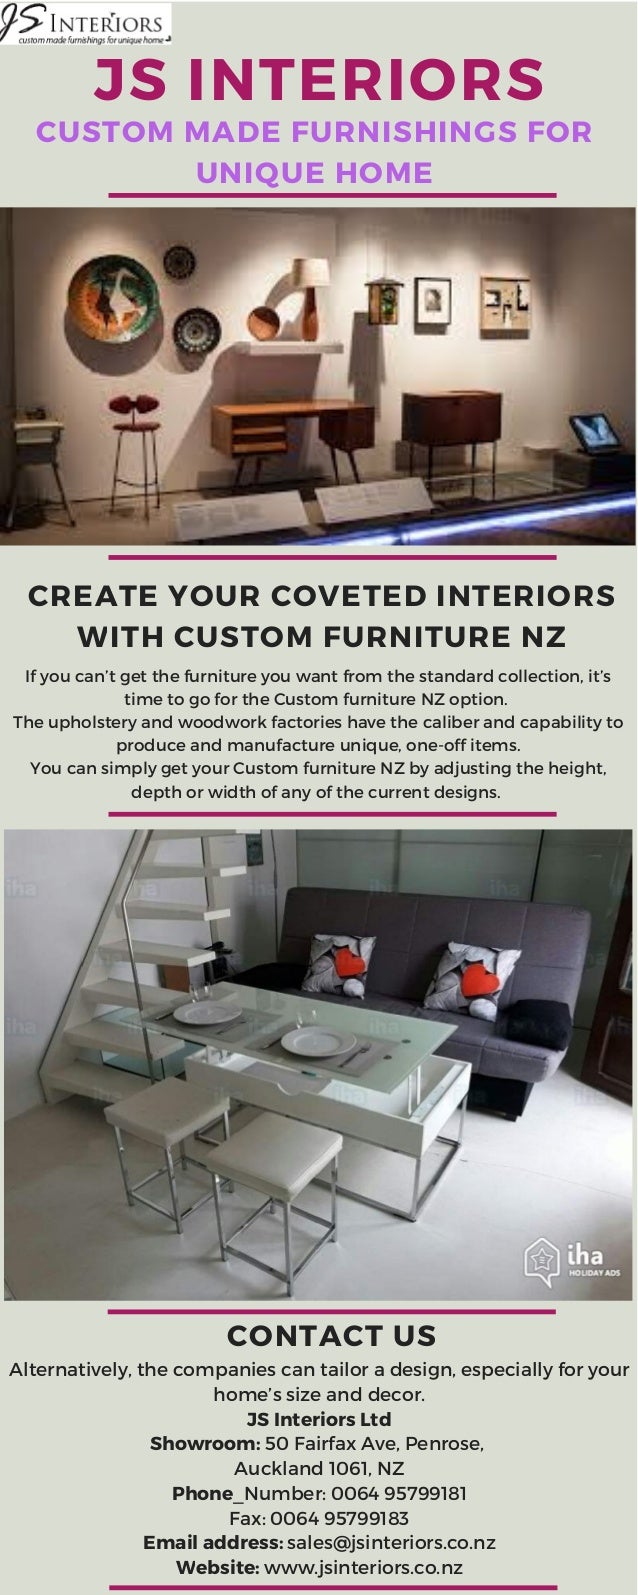 Create Your Coveted Interiors With Custom Furniture Nz